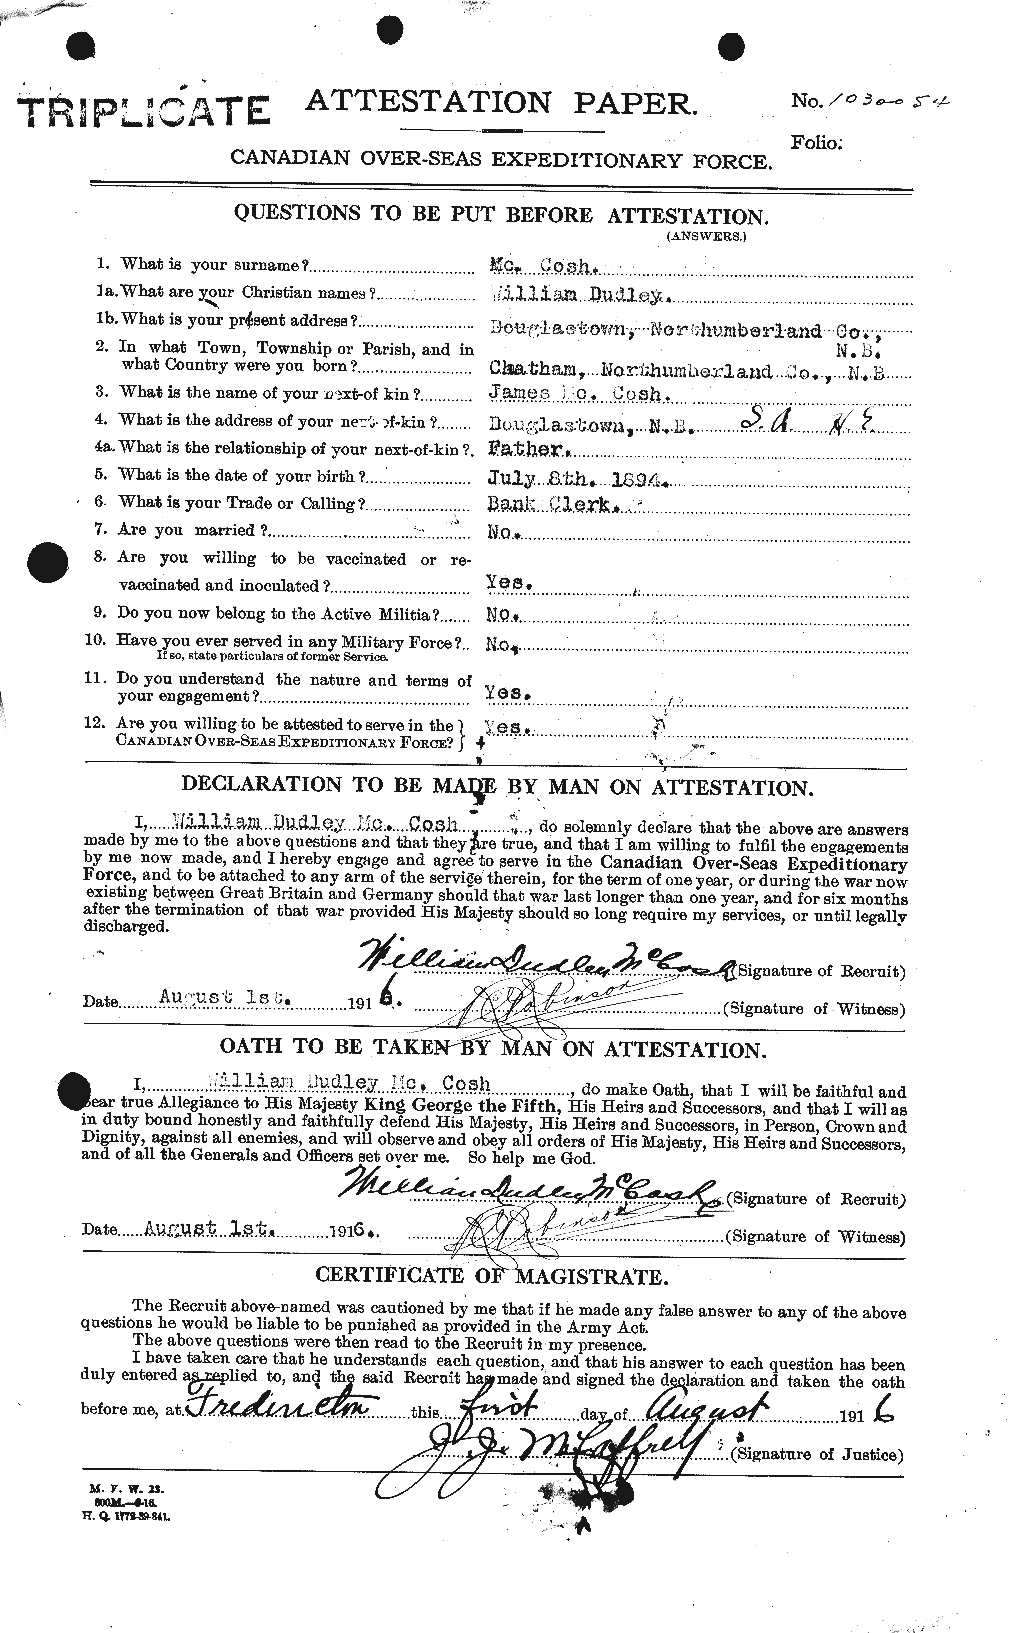 Personnel Records of the First World War - CEF 134999a